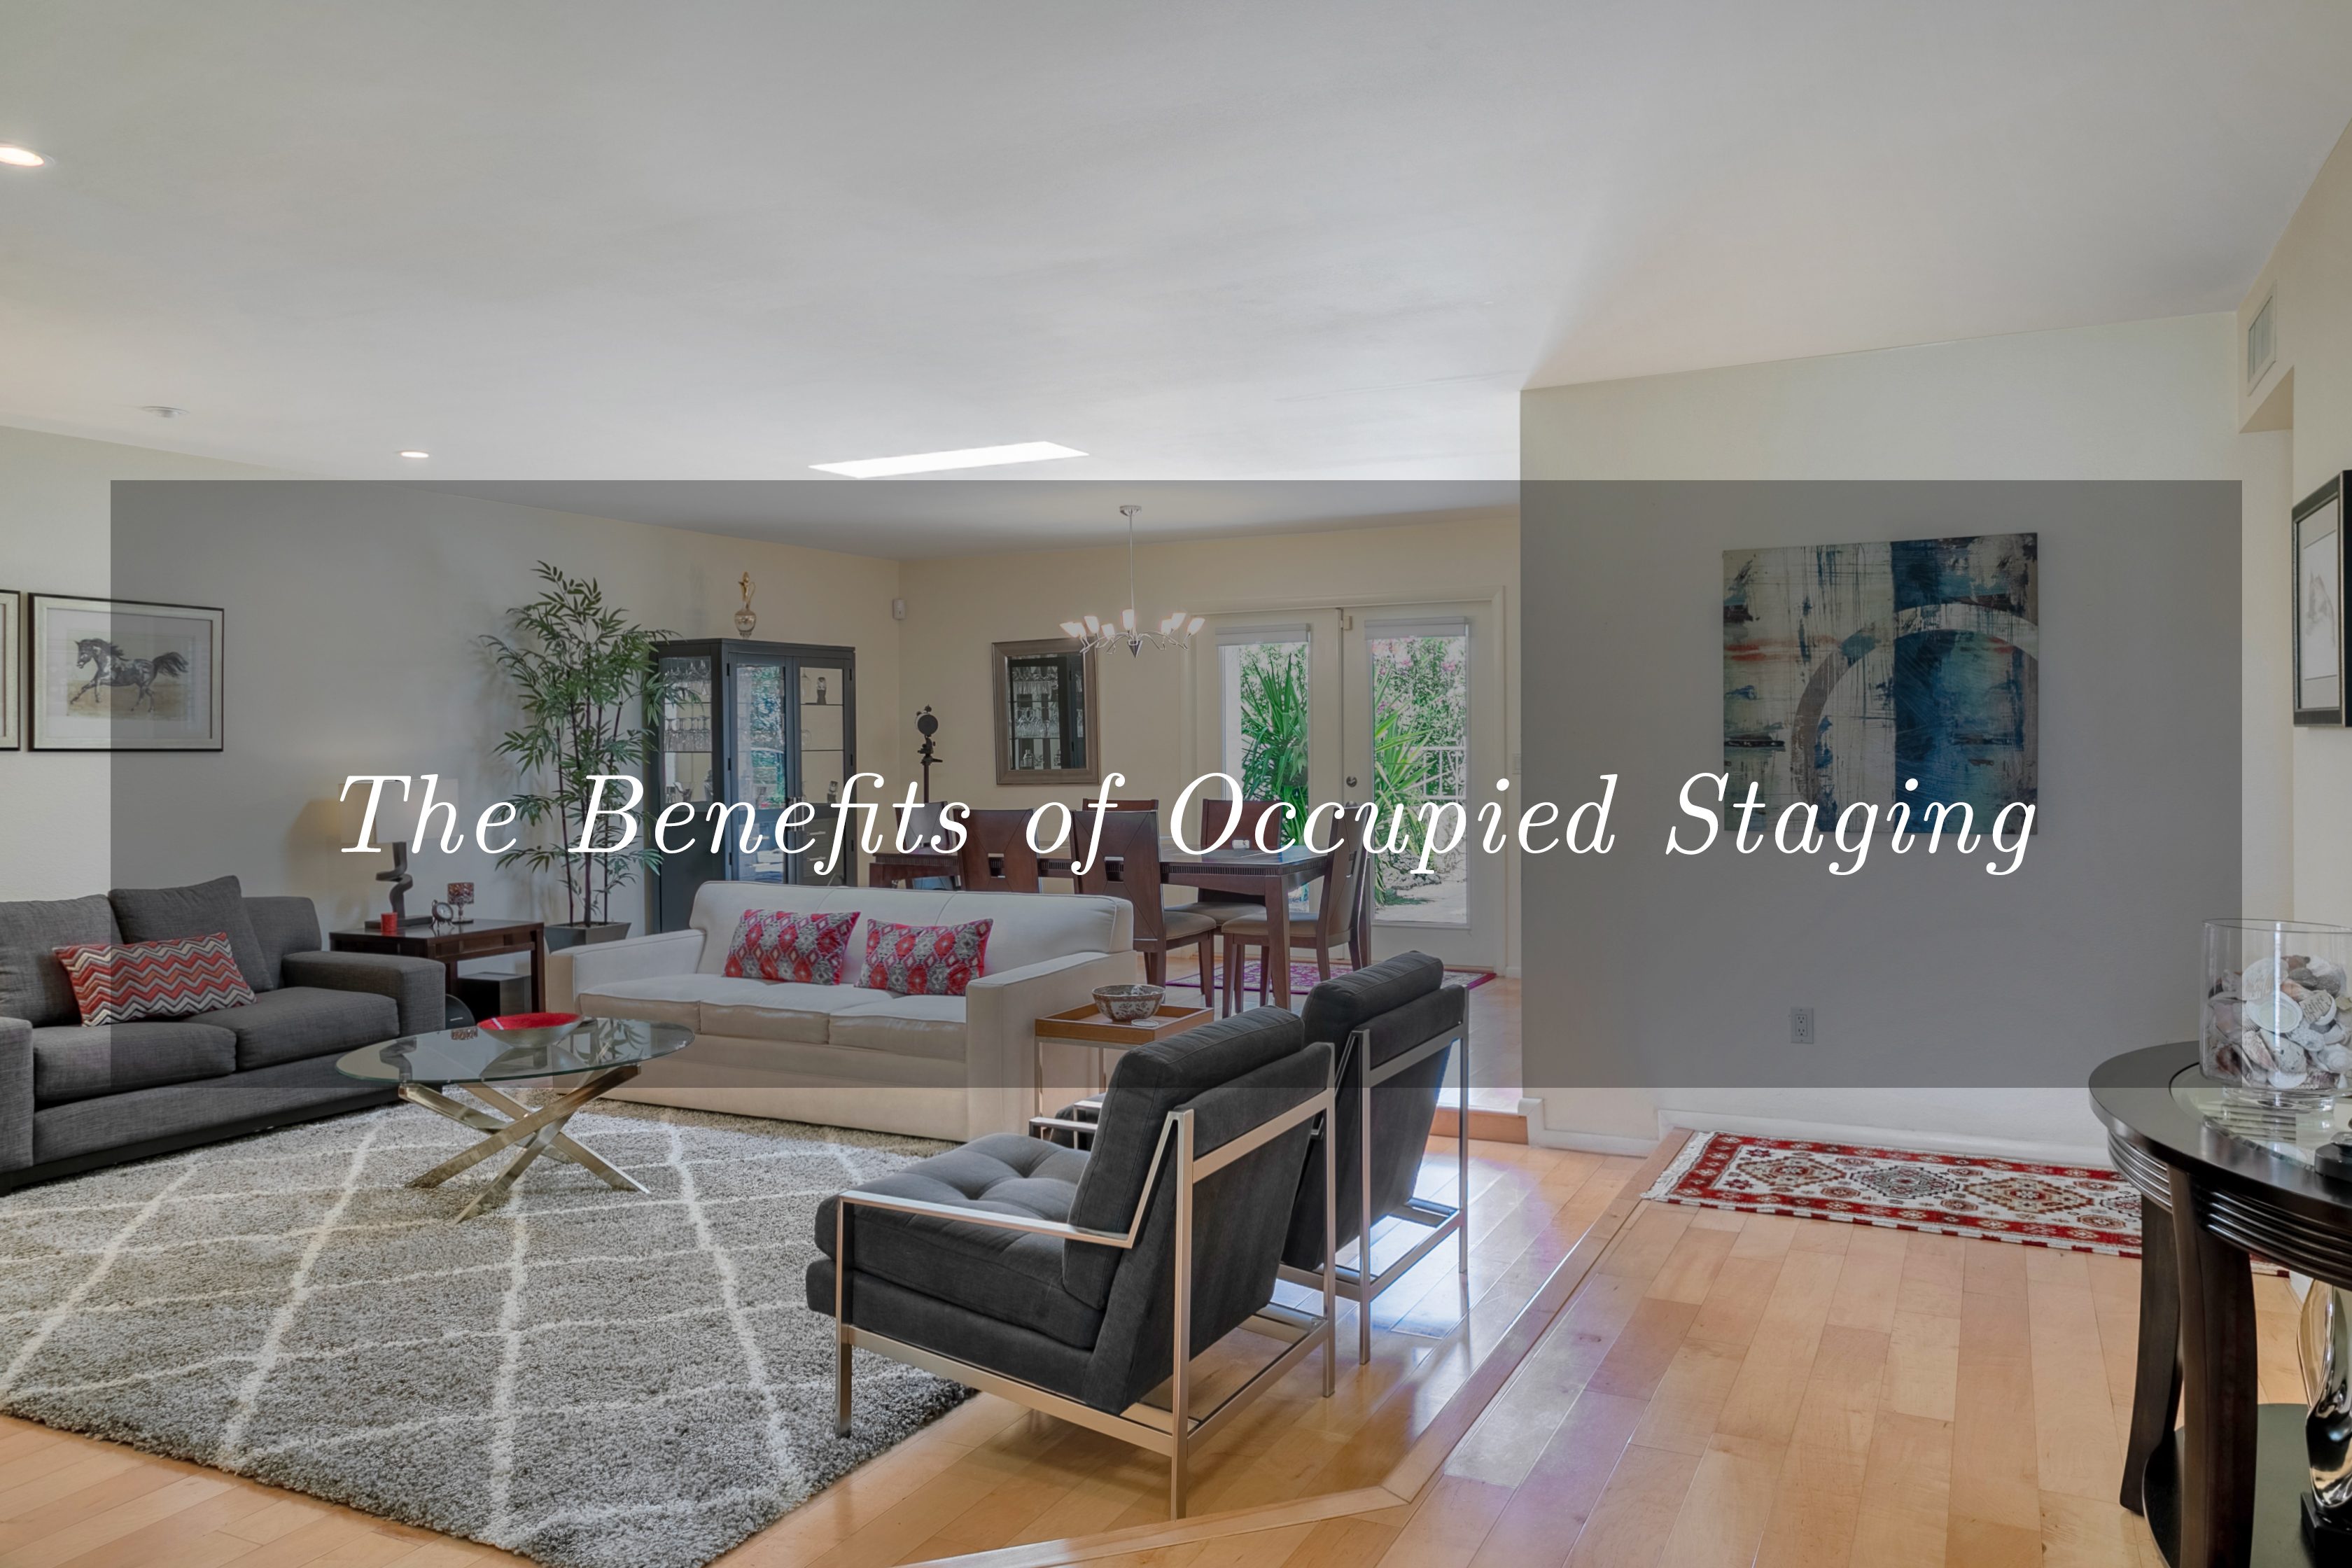 The Benefits of Occupied Staging